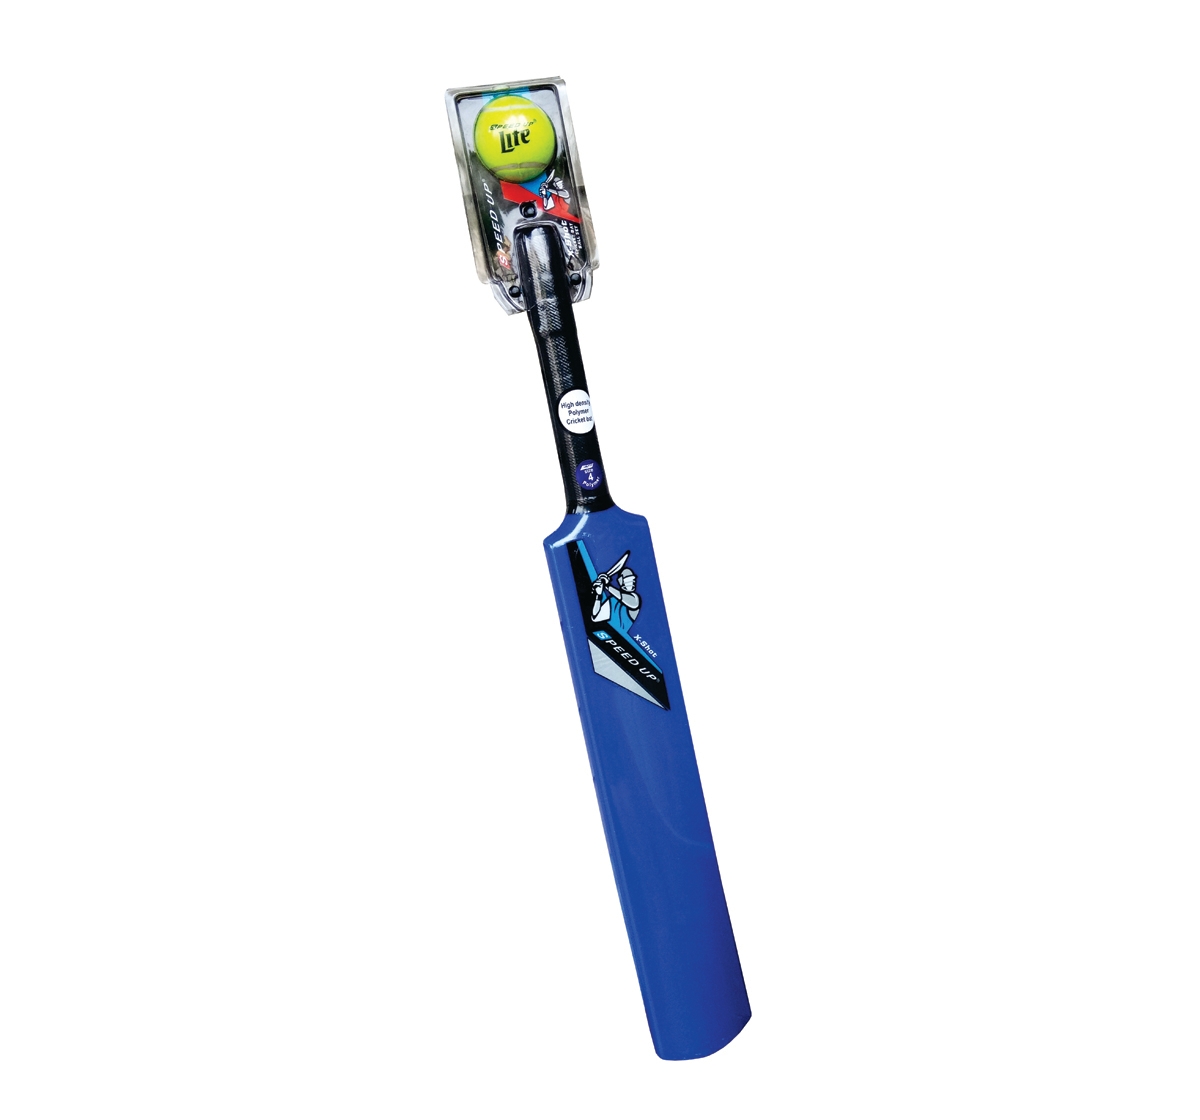 Speed Up | Speed Up Reinforced Polymer Bat And Ball Size 5 Kids Toy Multicolour 8Y+ 2